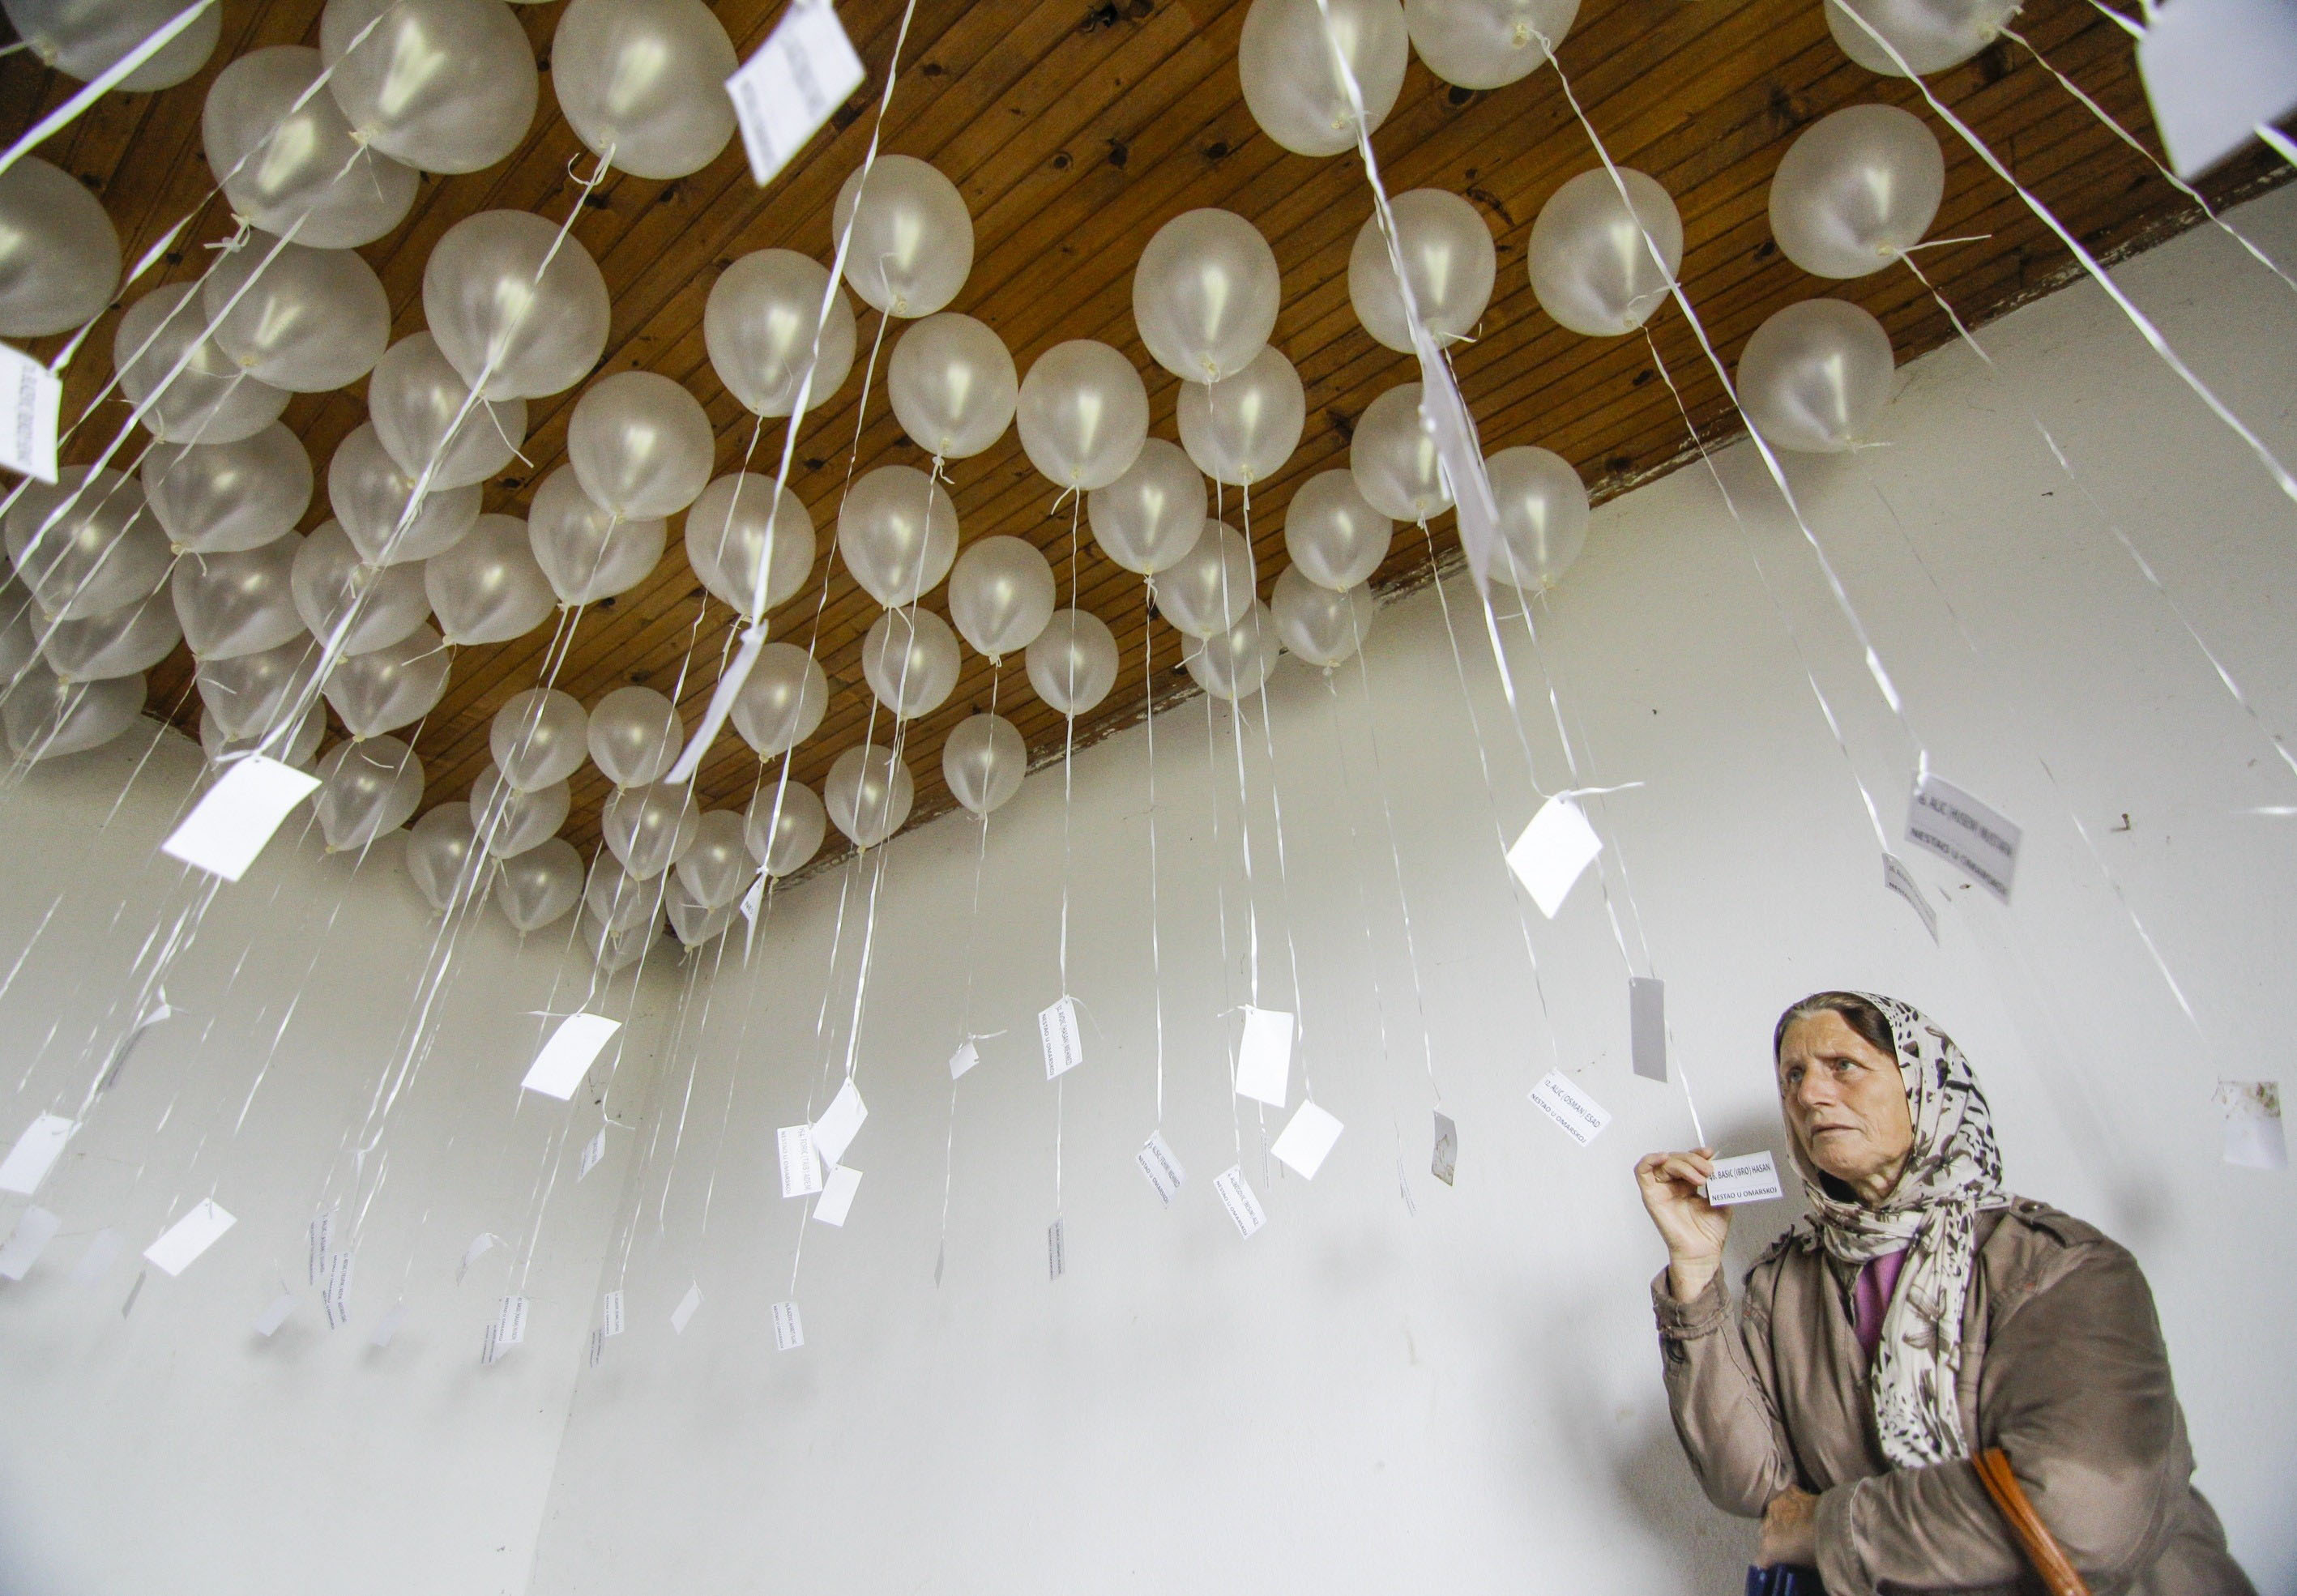 Relatives of those killed in Omarska release white balloons honoring the victims on the 22nd anniversary, in 2014, of the closing of the detention campWar in 1992